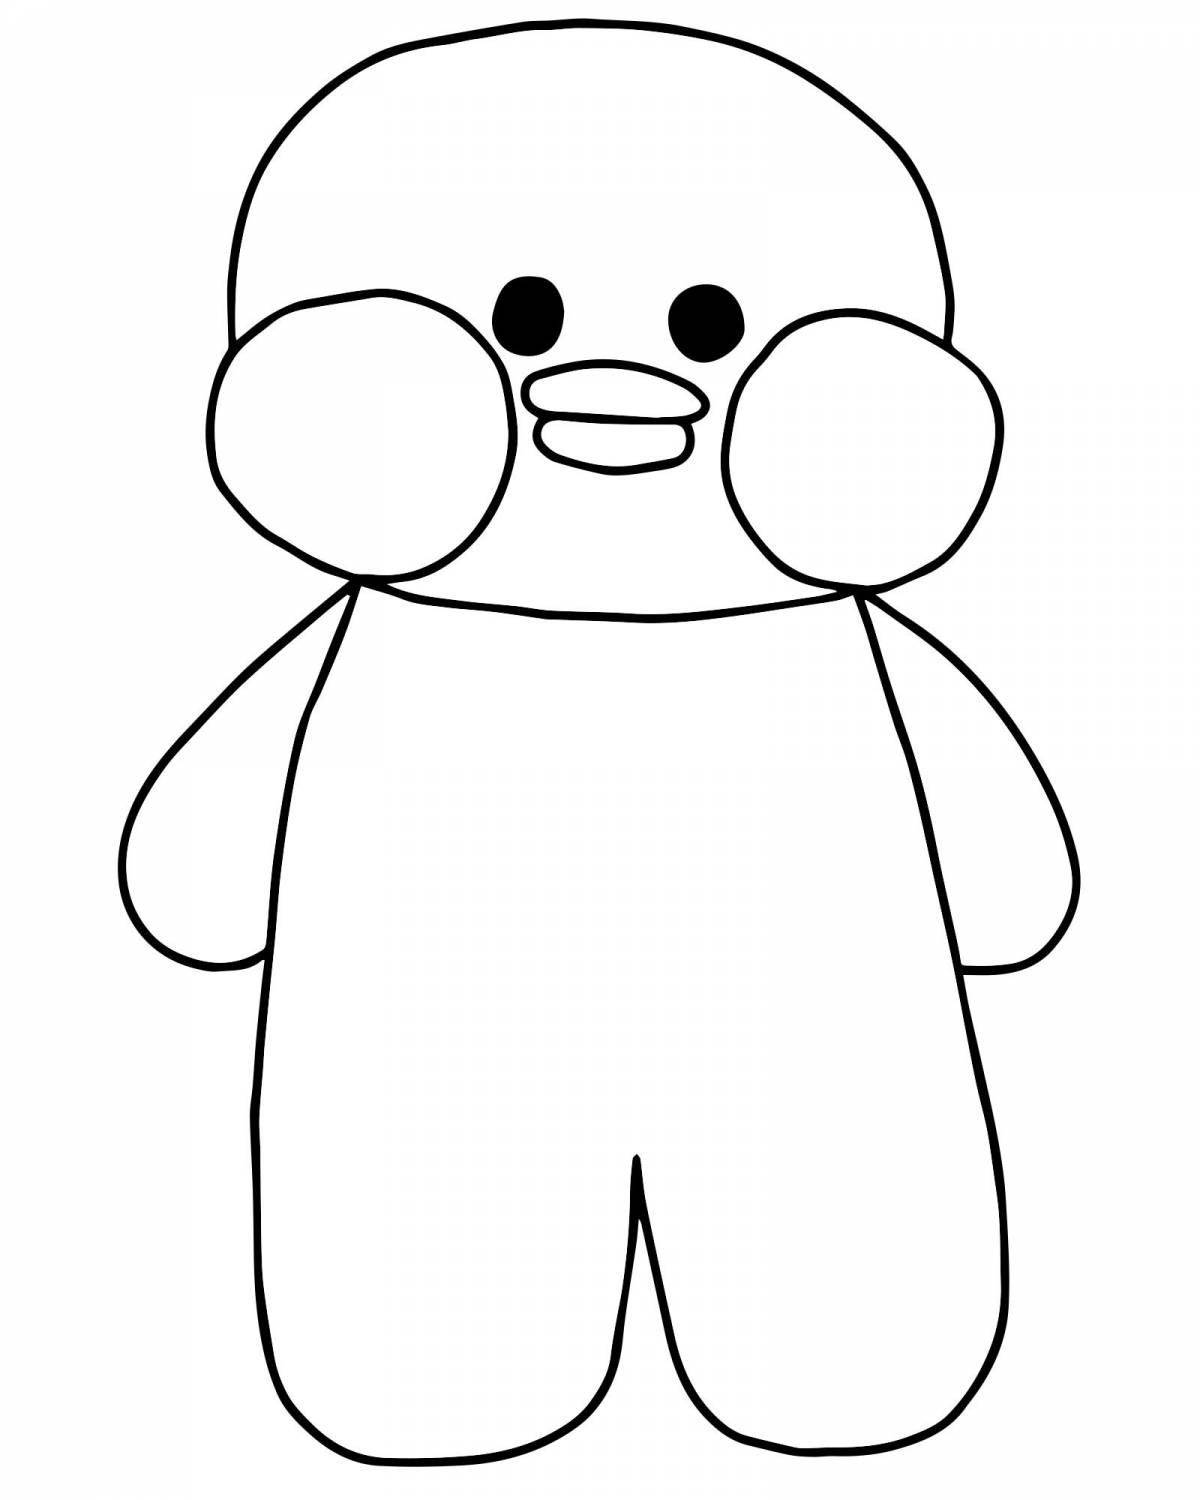 Cute lalaphan duck coloring book with clothes